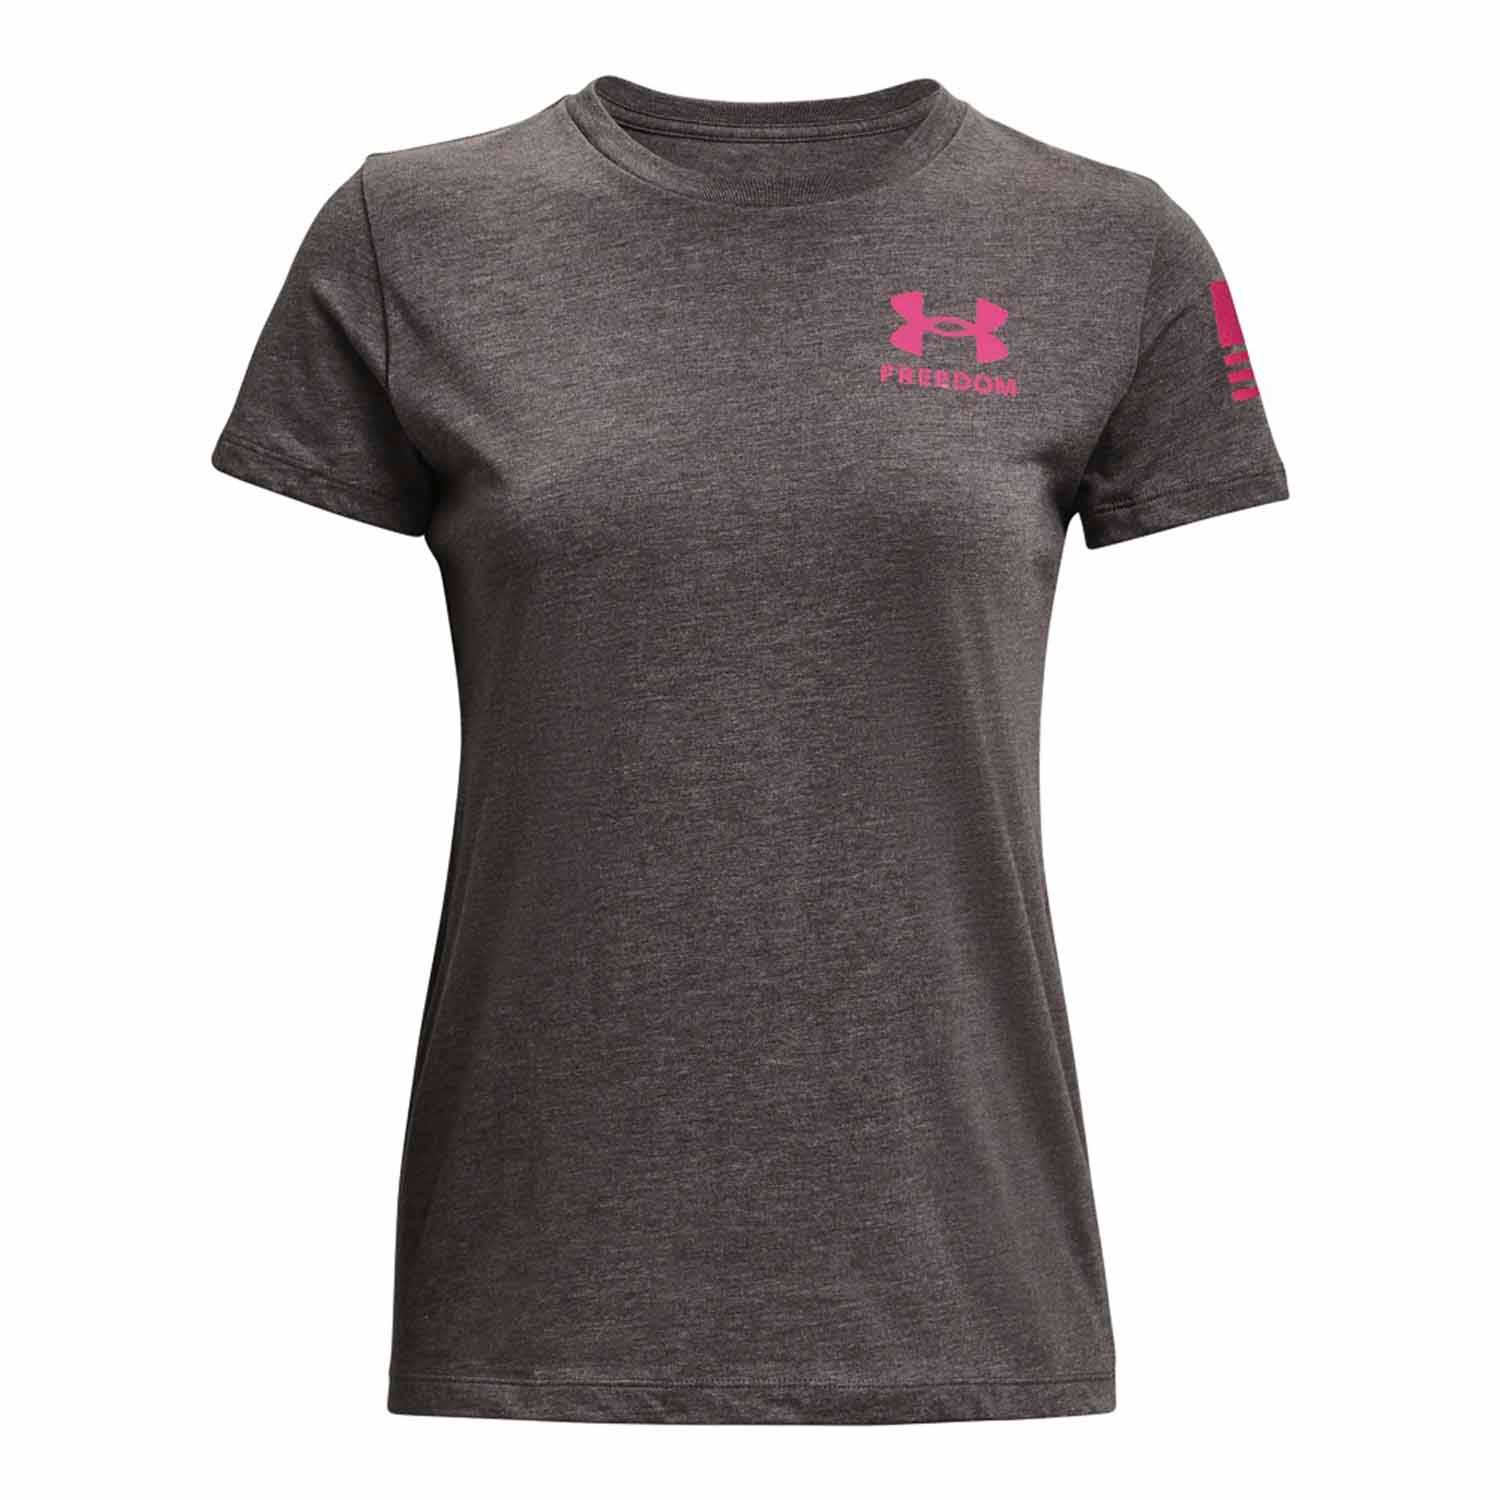 UNDER ARMOUR WOMEN'S FREEDOM FLAG GRAPHIC TEE